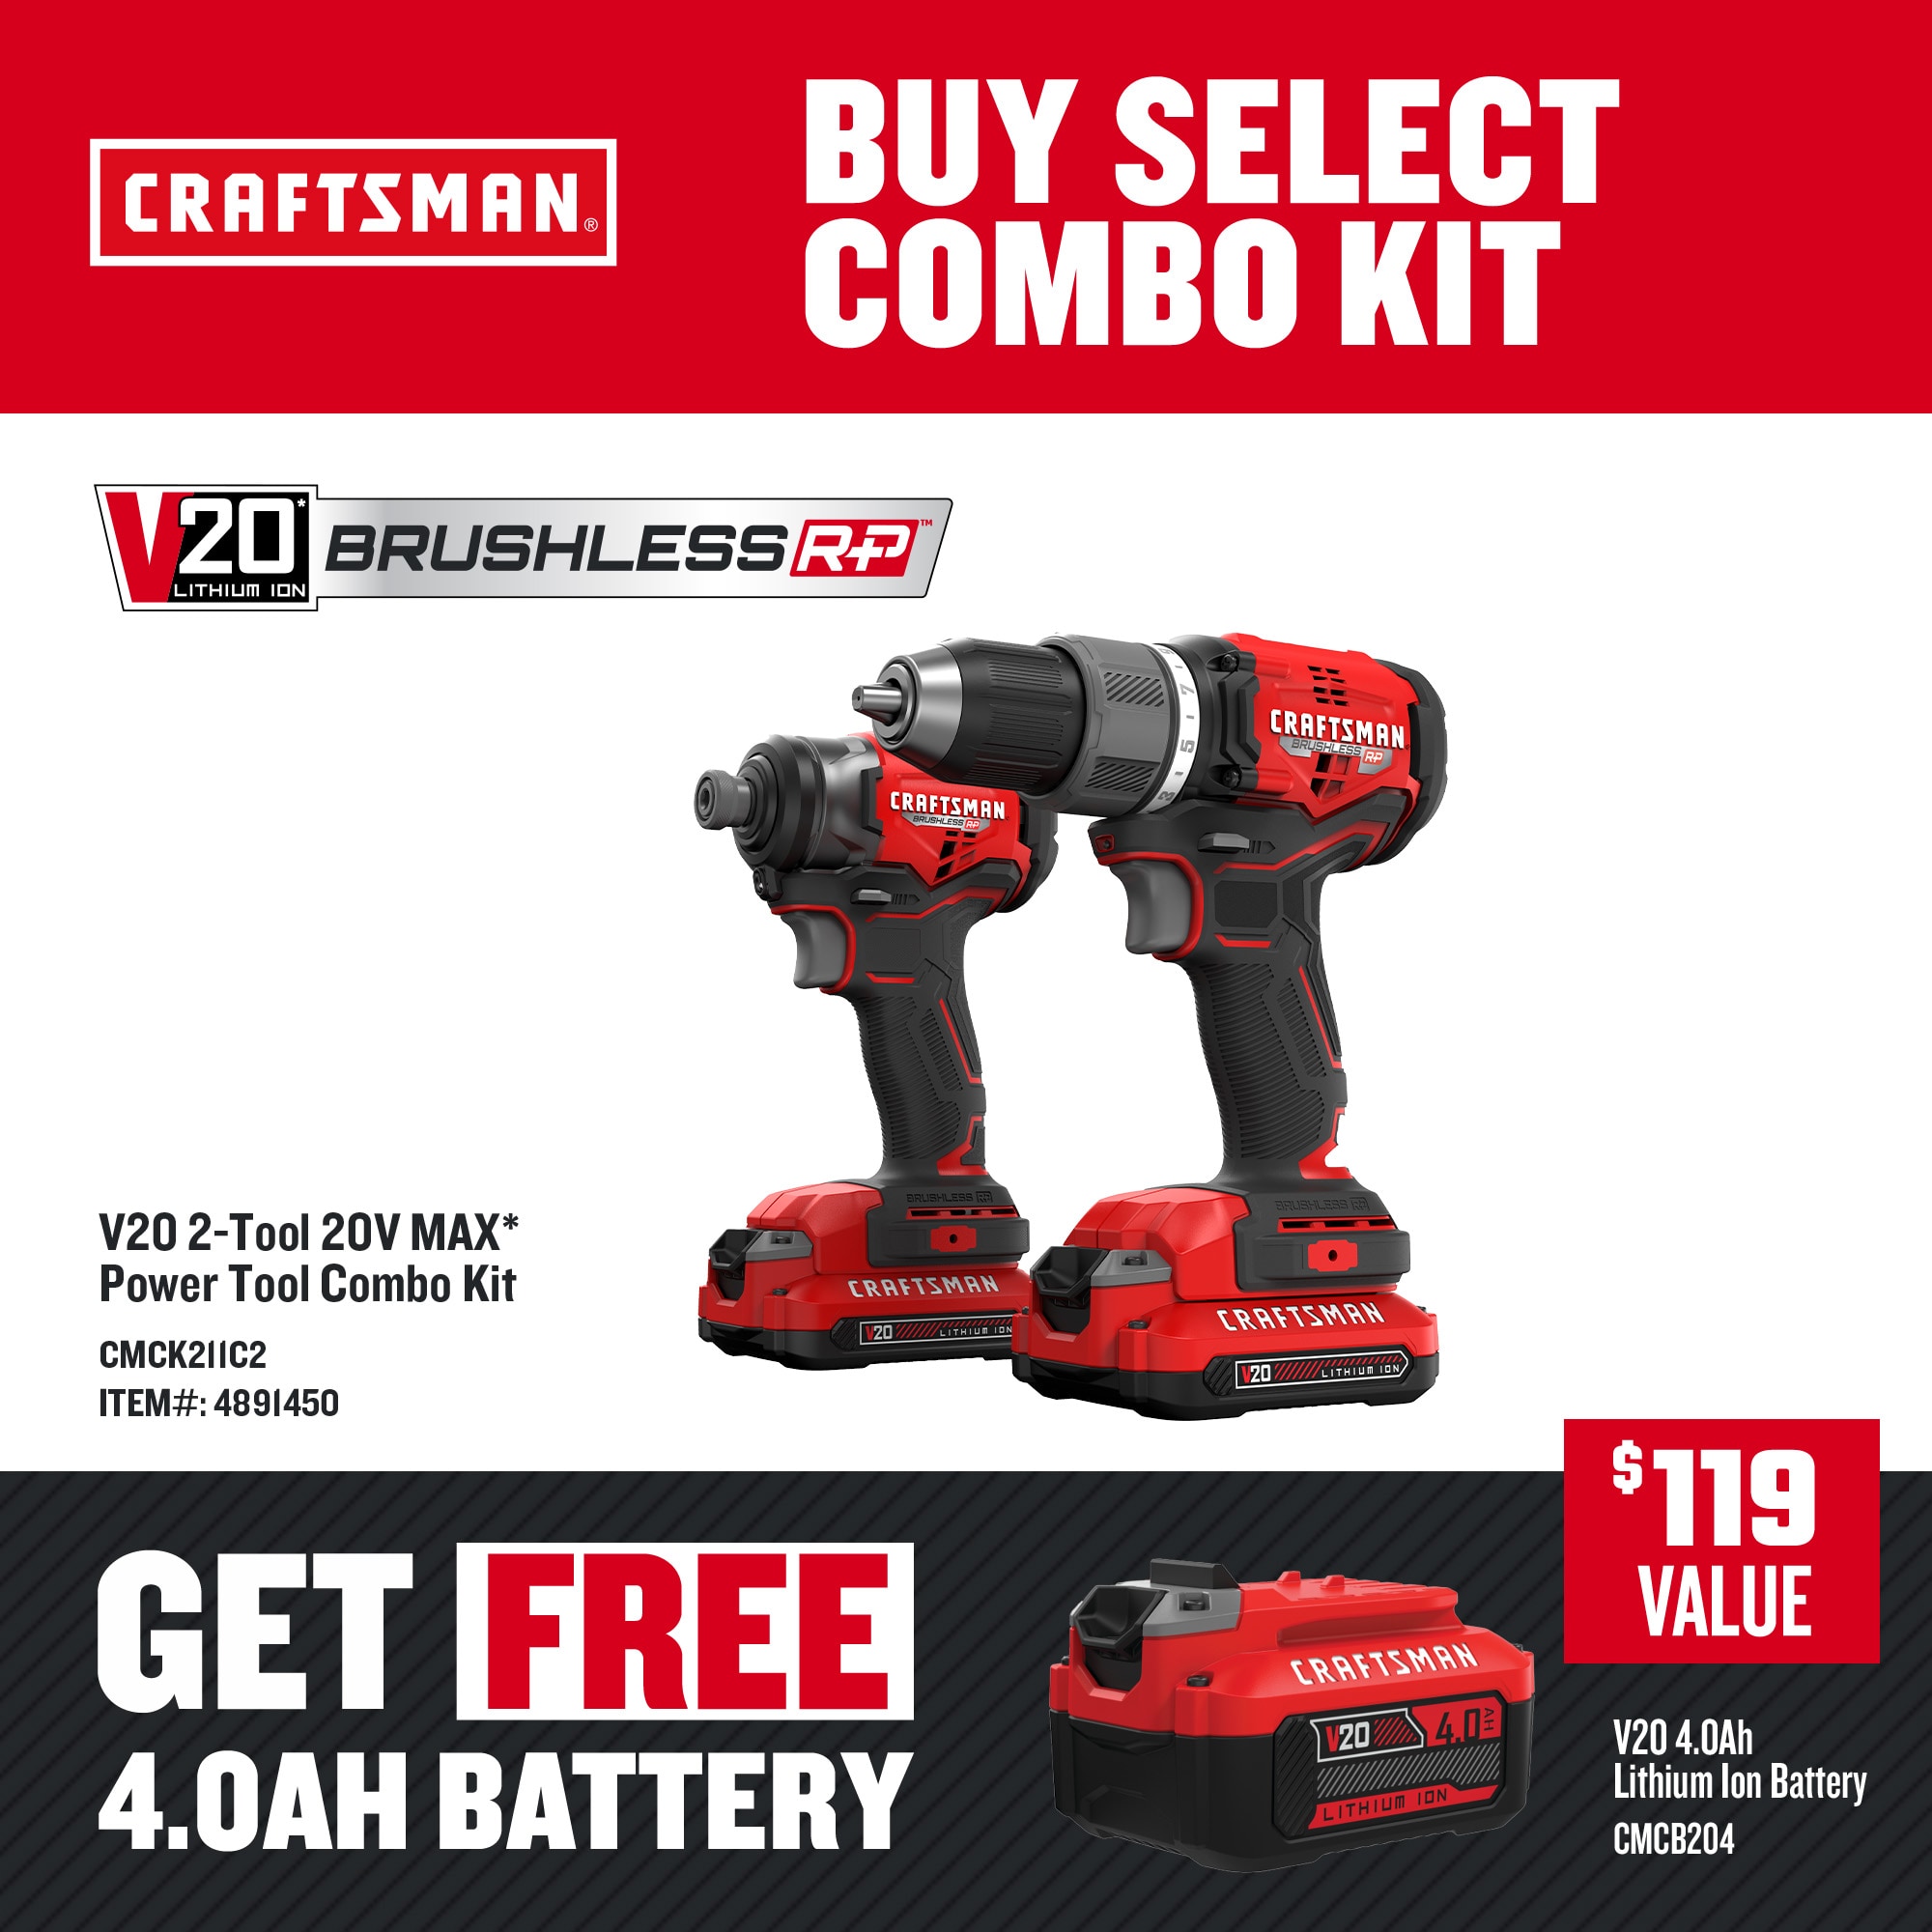 Lowes Clearance Tool Deals Out Wazoo: Dewalt, Bosch, Metabo, Craftsman Tools  